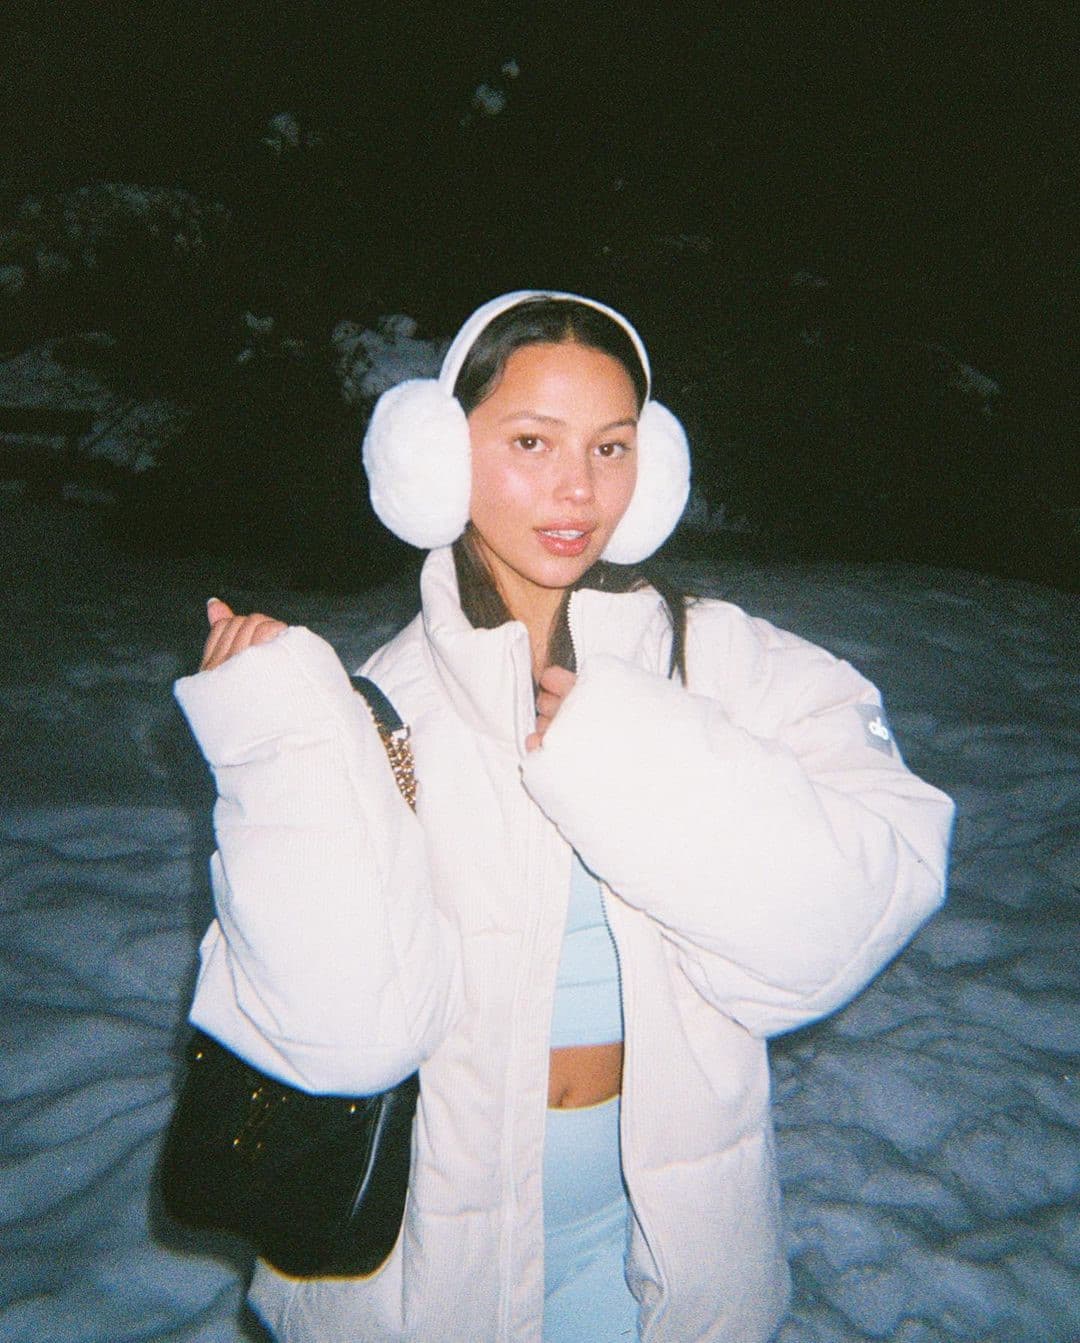 @fiona.bl wearing a light blue workout set with a sherpa puffer jacket on top and faux fur ear muffs while standing on a snow-covered ground at night.